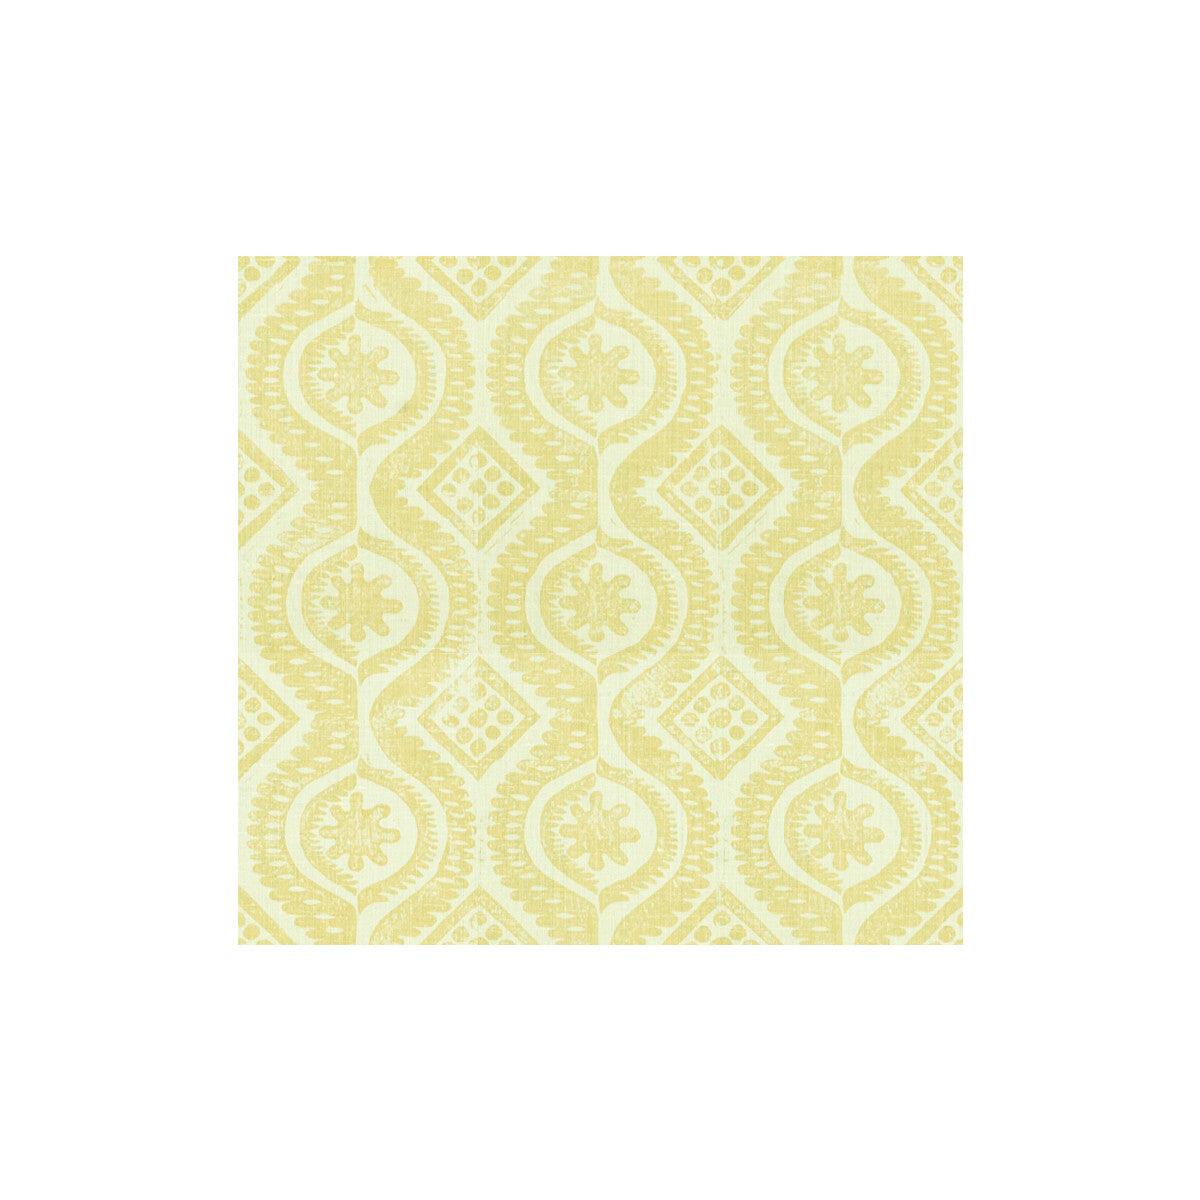 Damask fabric in yellow color - pattern BFC-3518.40.0 - by Lee Jofa in the Blithfield collection